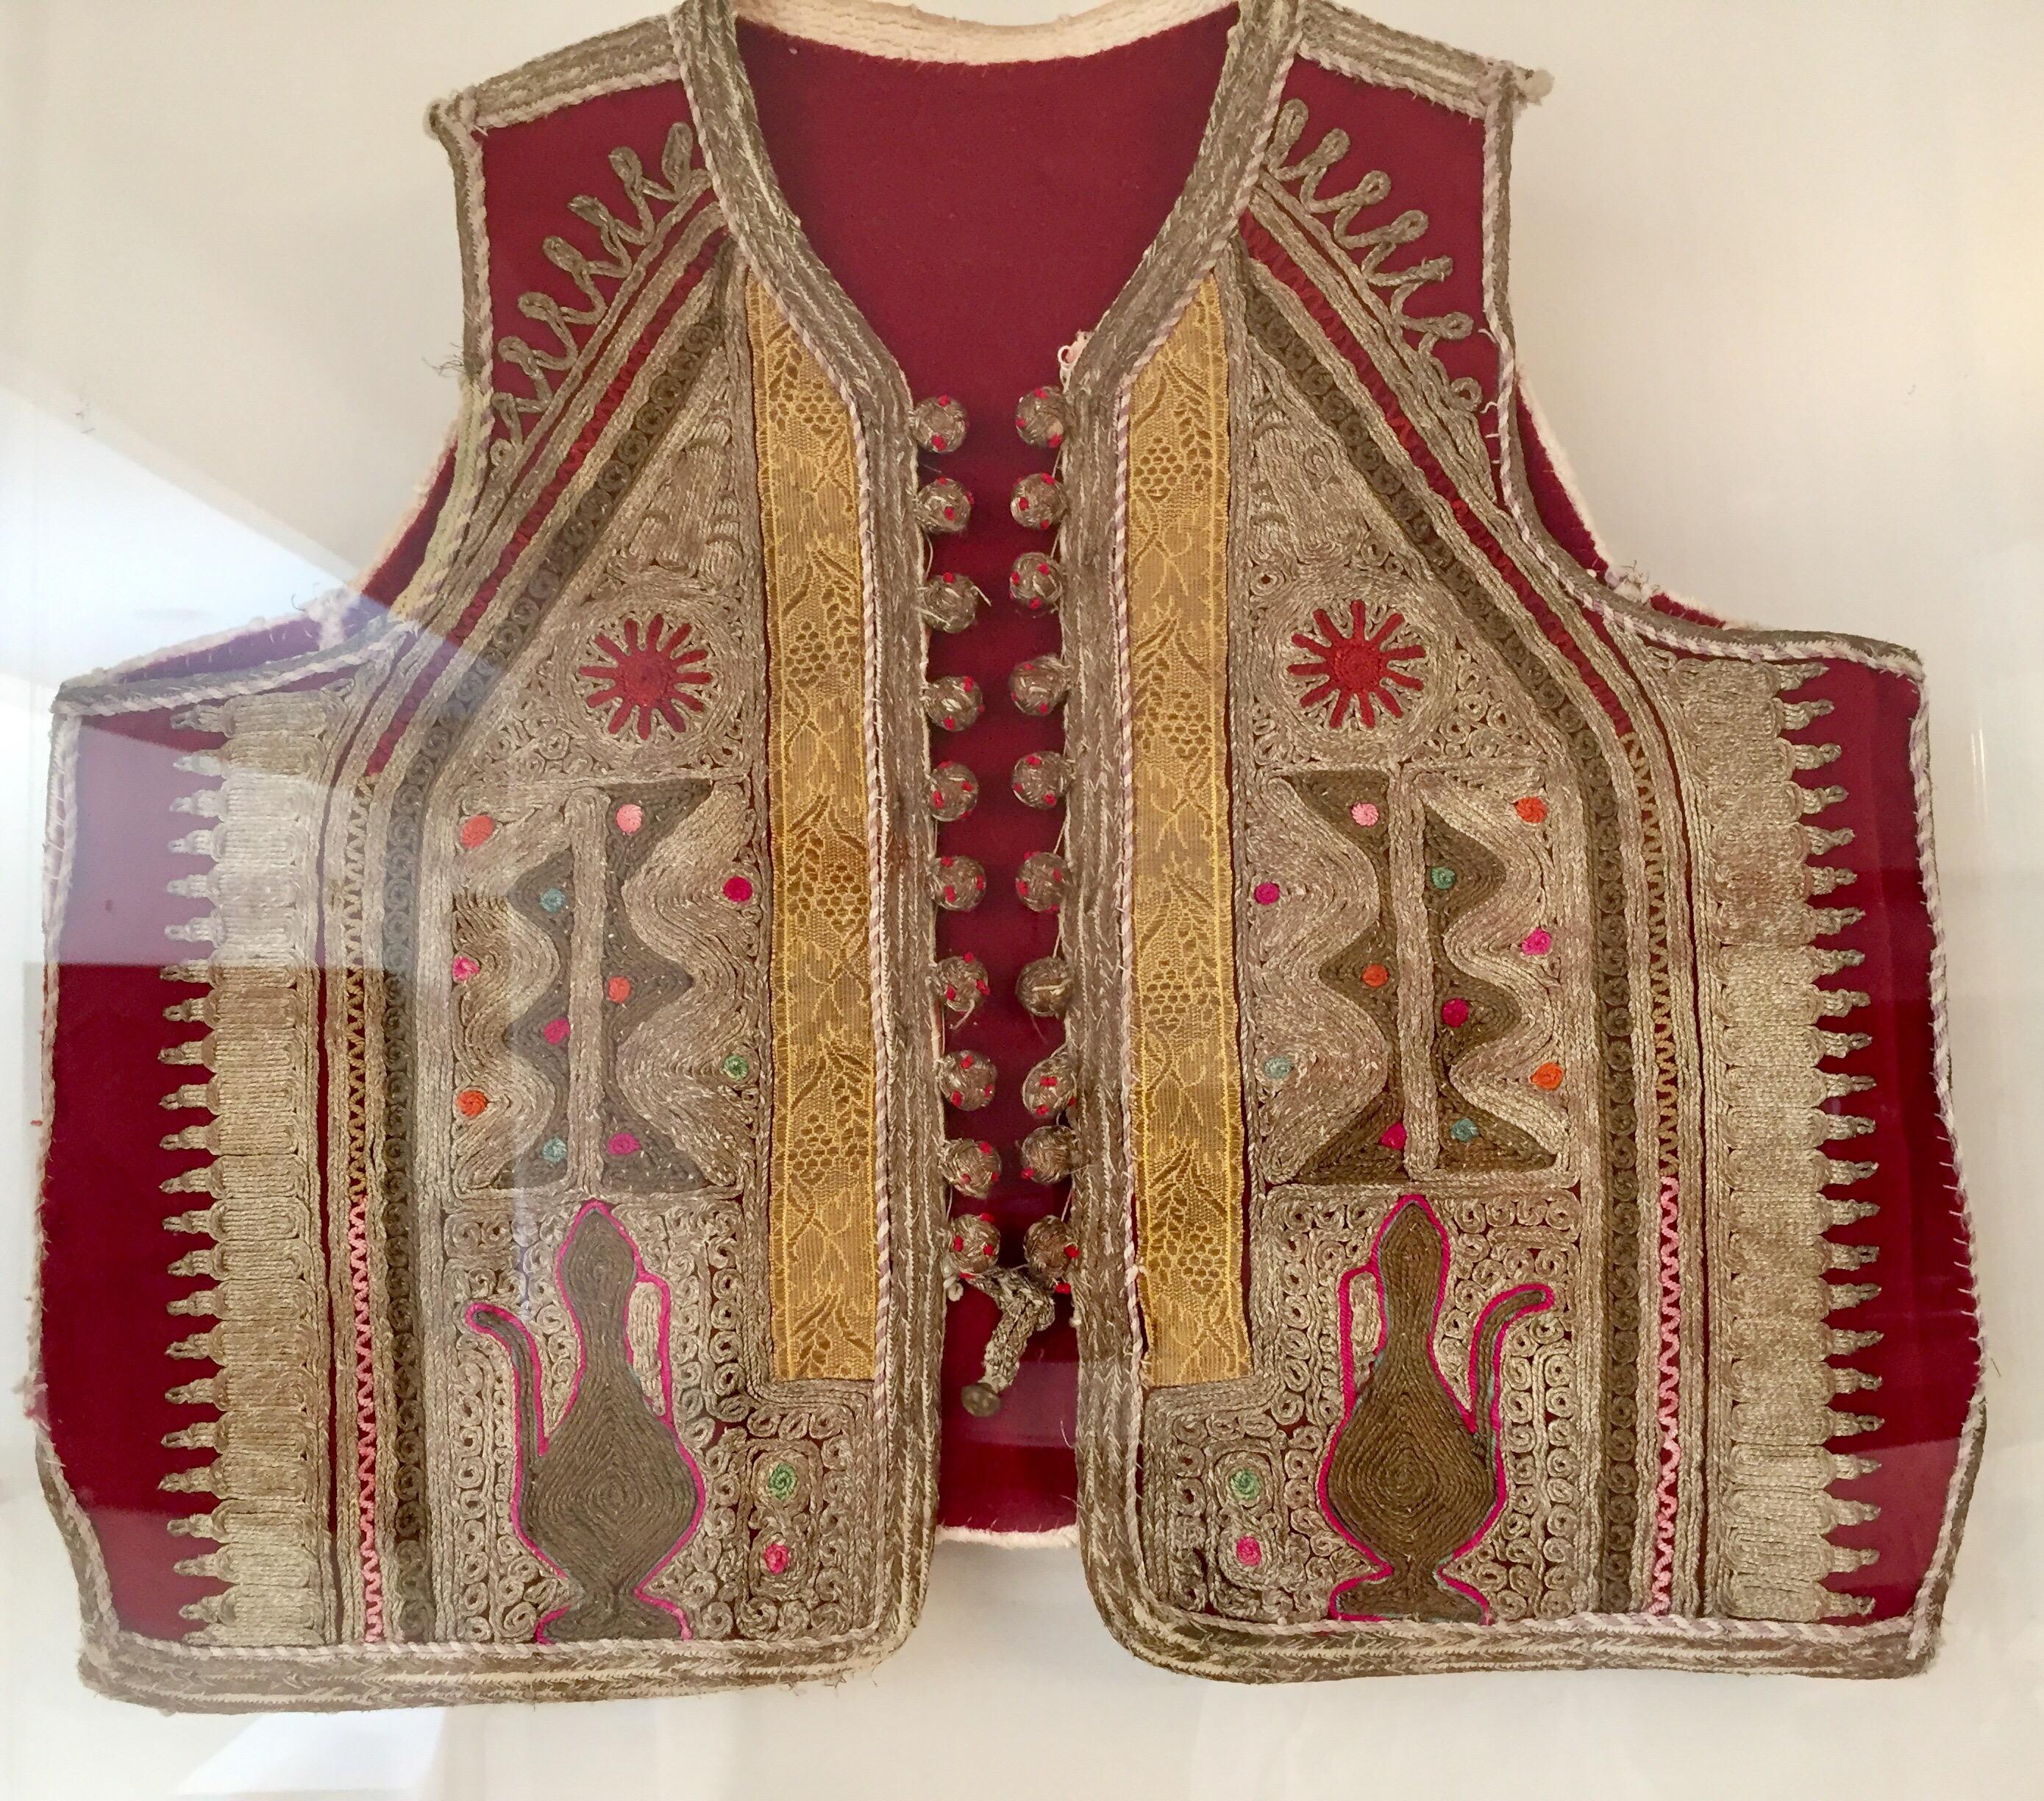 Islamic 19th Century Antique Ottoman Embroidered Vest Framed in a Lucite Box